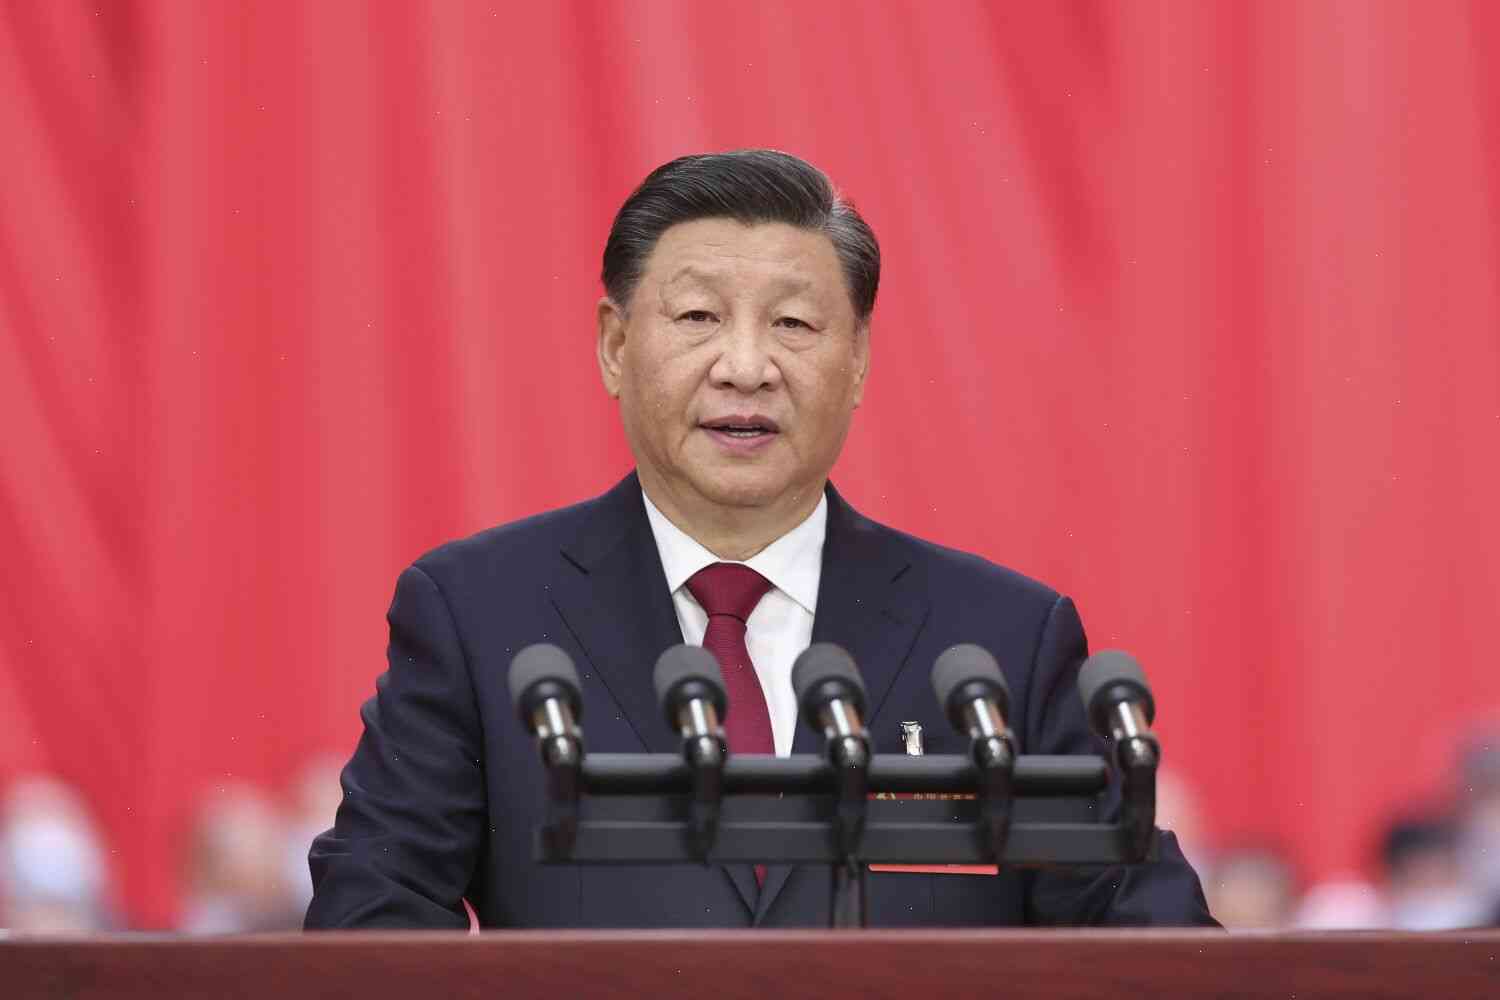 China and Xi Jinping are not the only autocratic regimes in the world